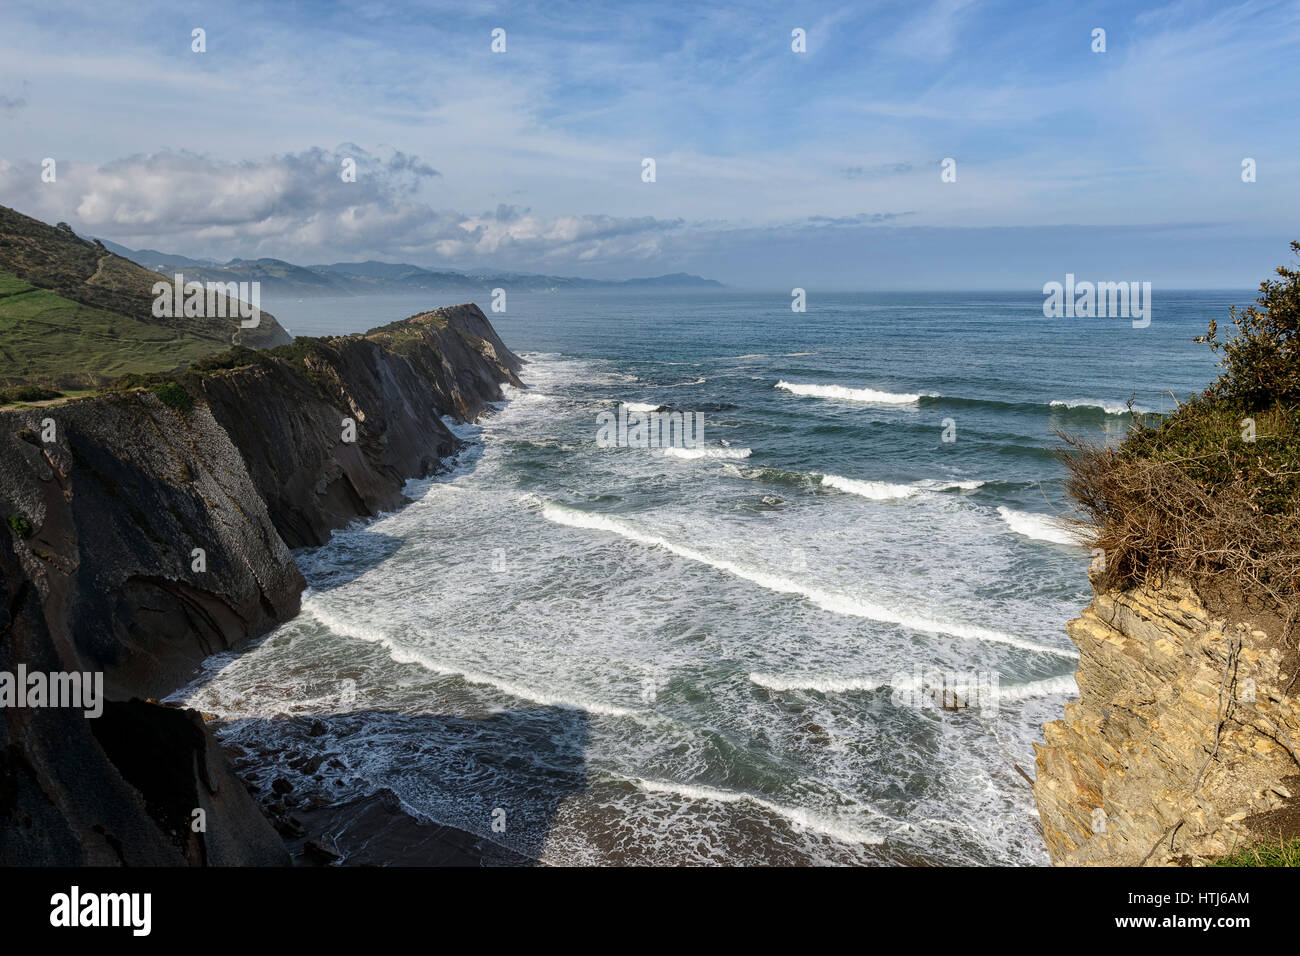 Beach and cliff famous for filming eight film Basque surnames and the game series of tronos.Itzurun, Zumaya, Guipuzcoa, Basque Country, Spain. Stock Photo